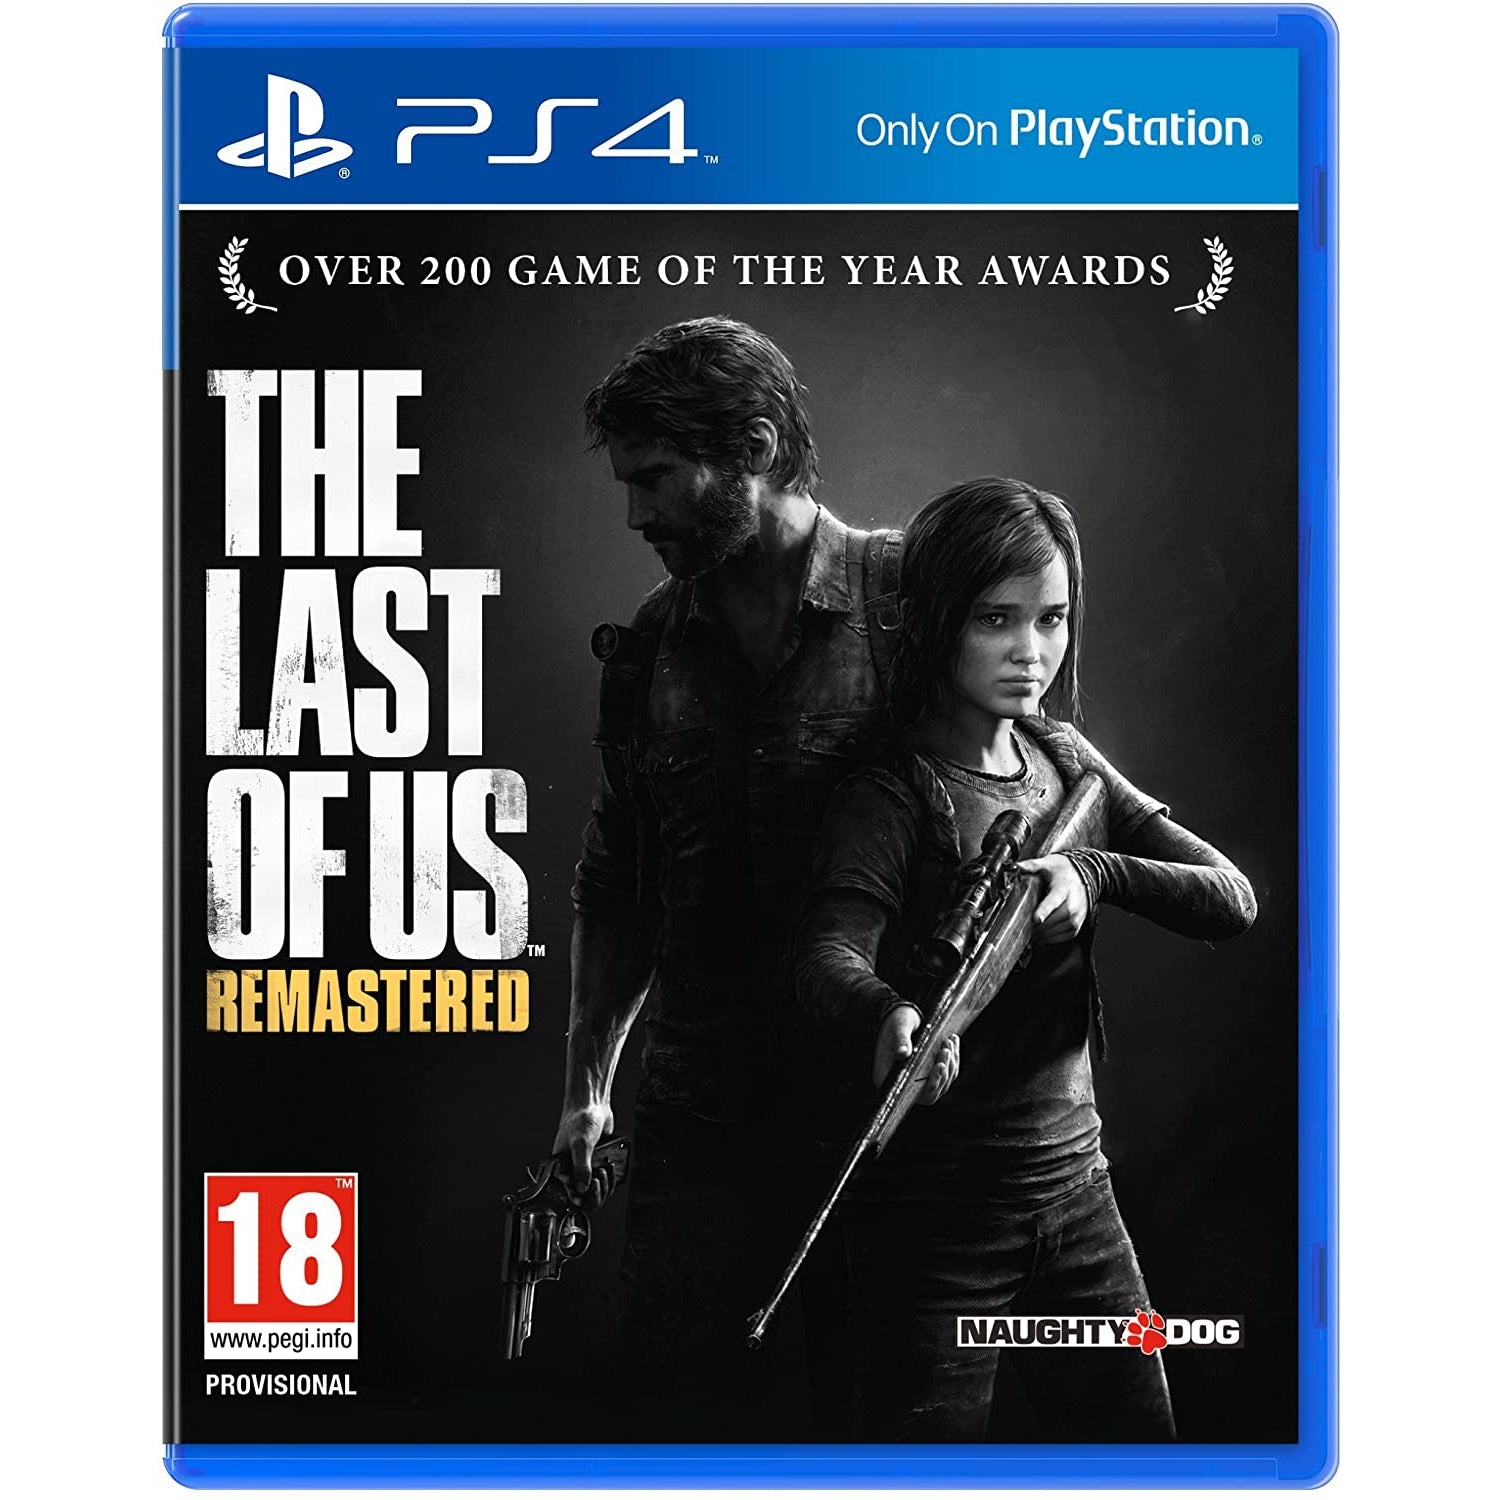 The Last of Us: Remastered (PS4) Disc Only